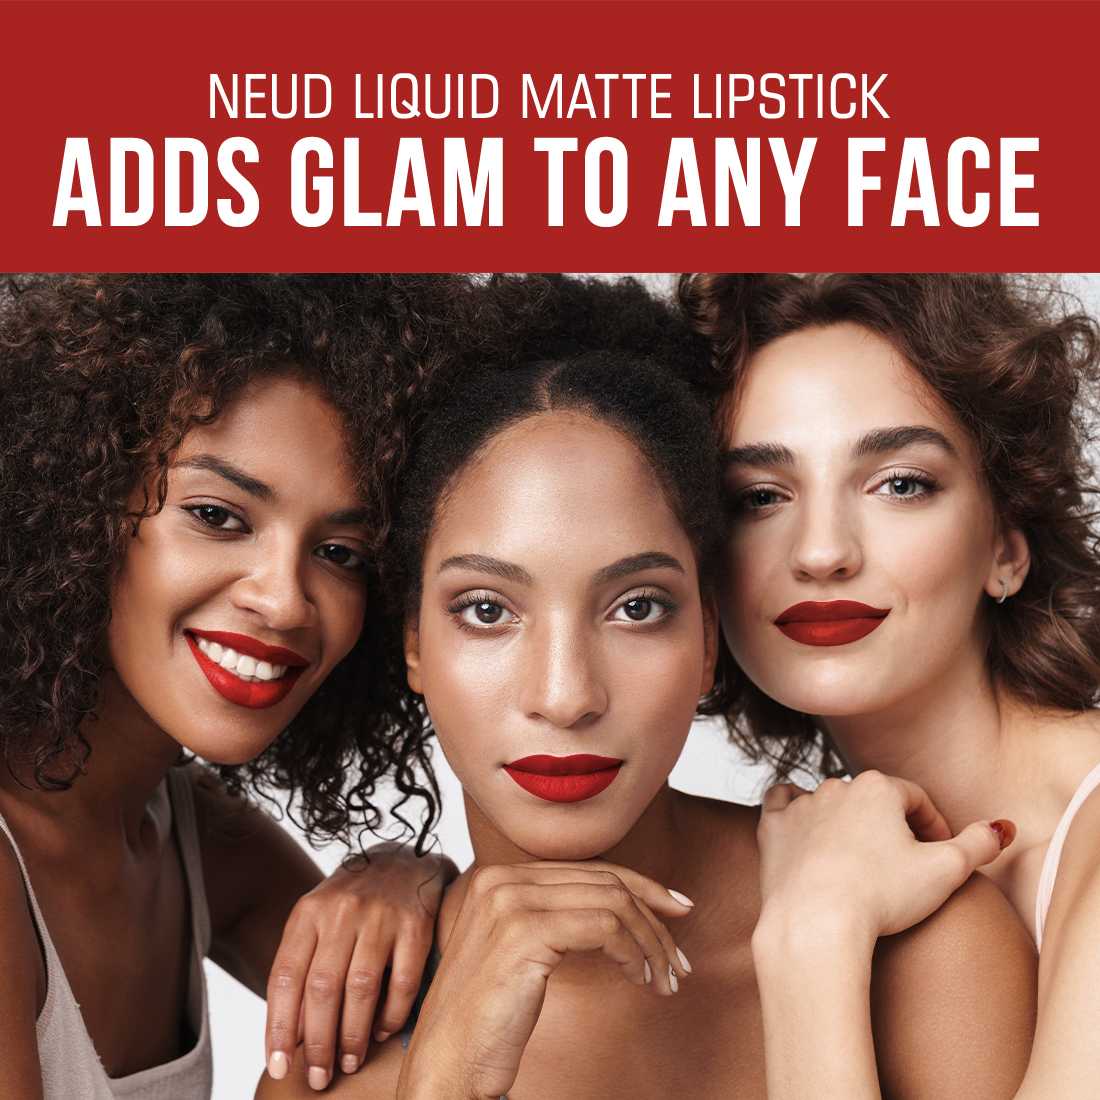 NEUD Matte Liquid Lipstick Perfect Pout with Jojoba Oil, Vitamin E and Almond Oil - Smudge Proof 12-hour Stay Formula with Free Lip Gloss